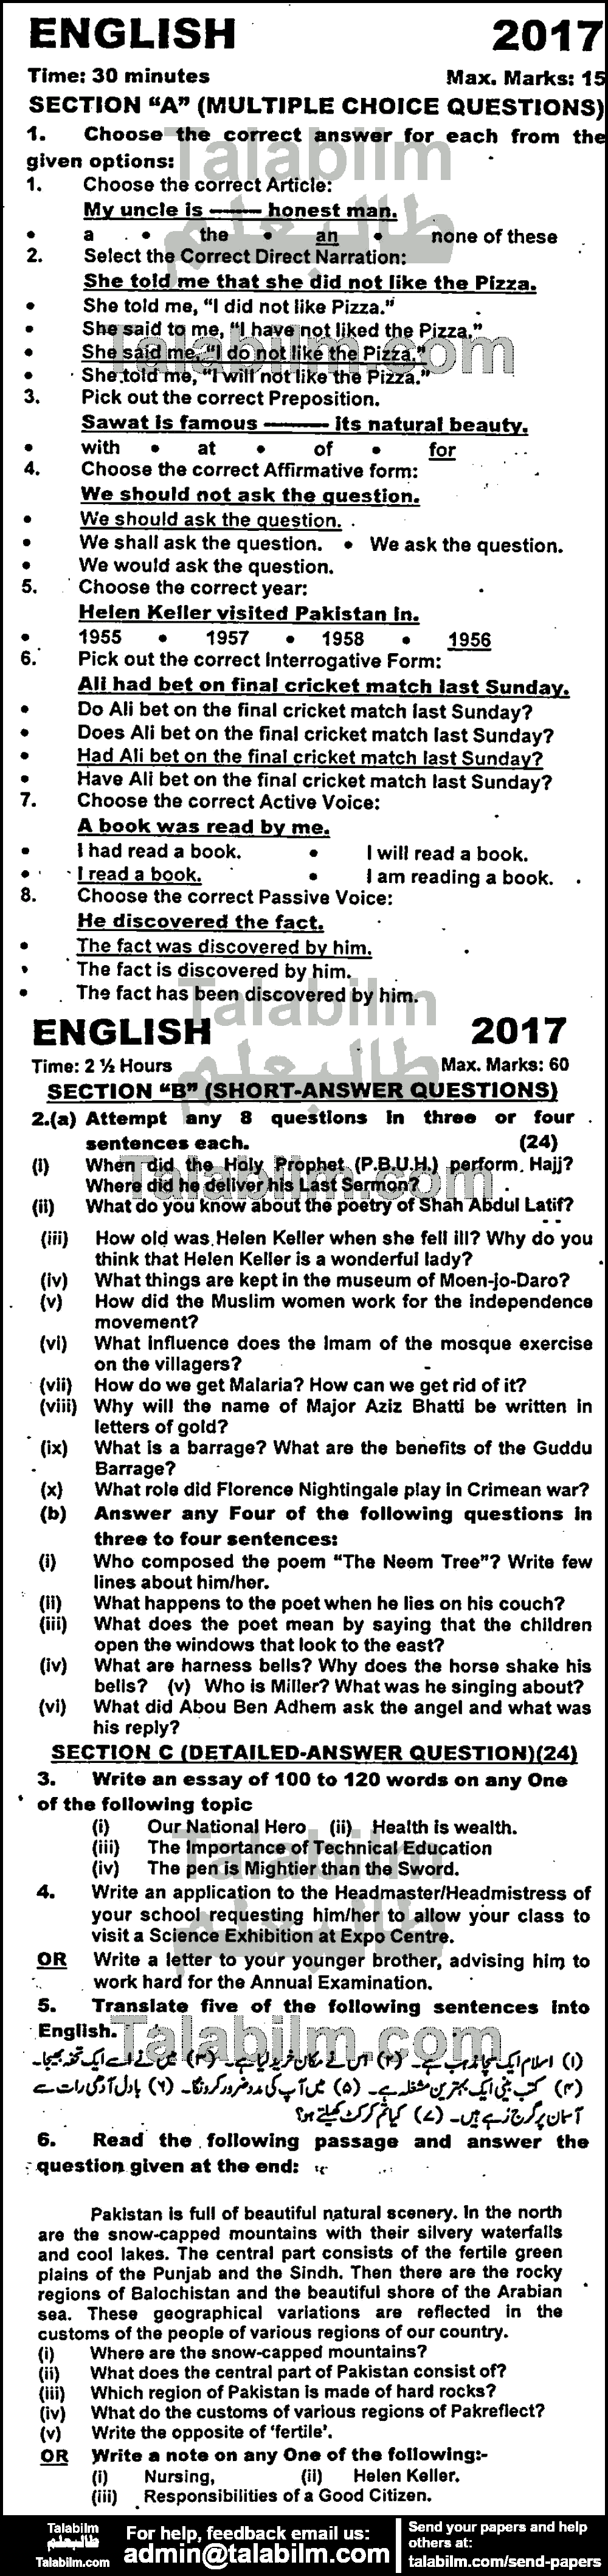 English 0 past paper for 2017 Group-I